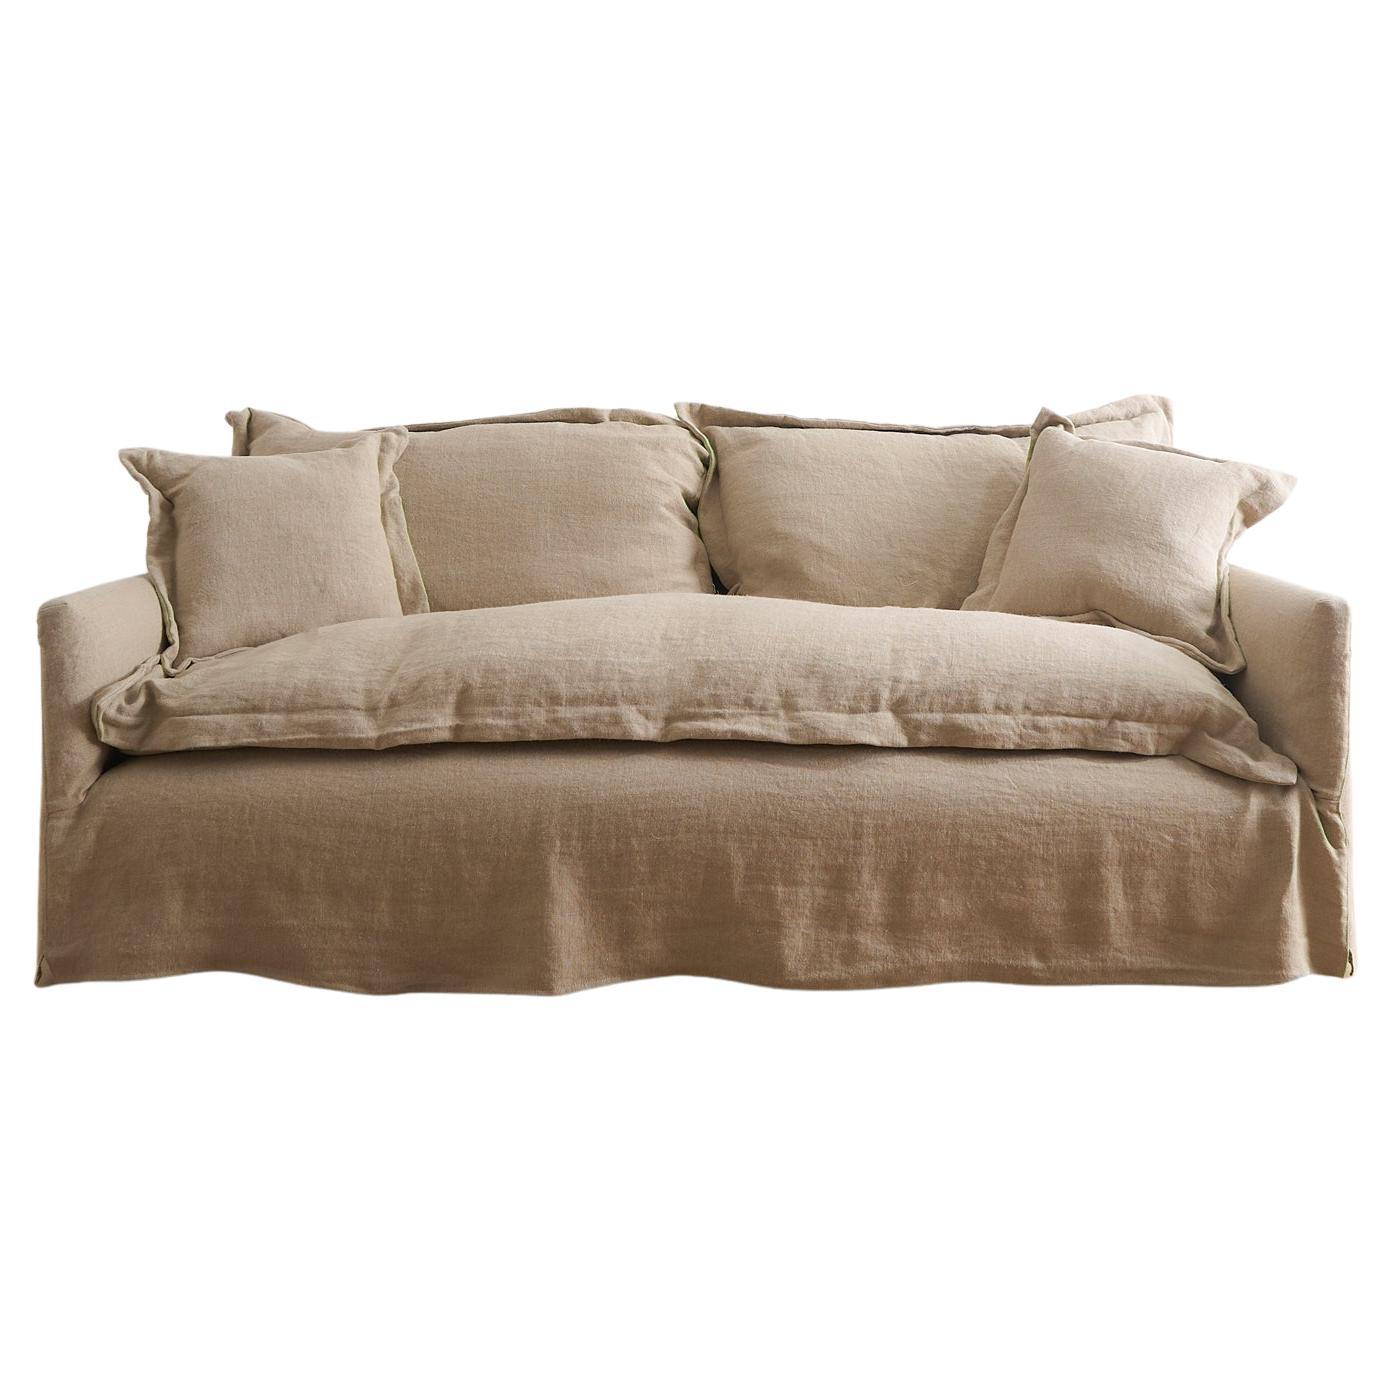 Slipcovered Paloma Sofa in Brevard Burlap Linen by Cisco Brothers